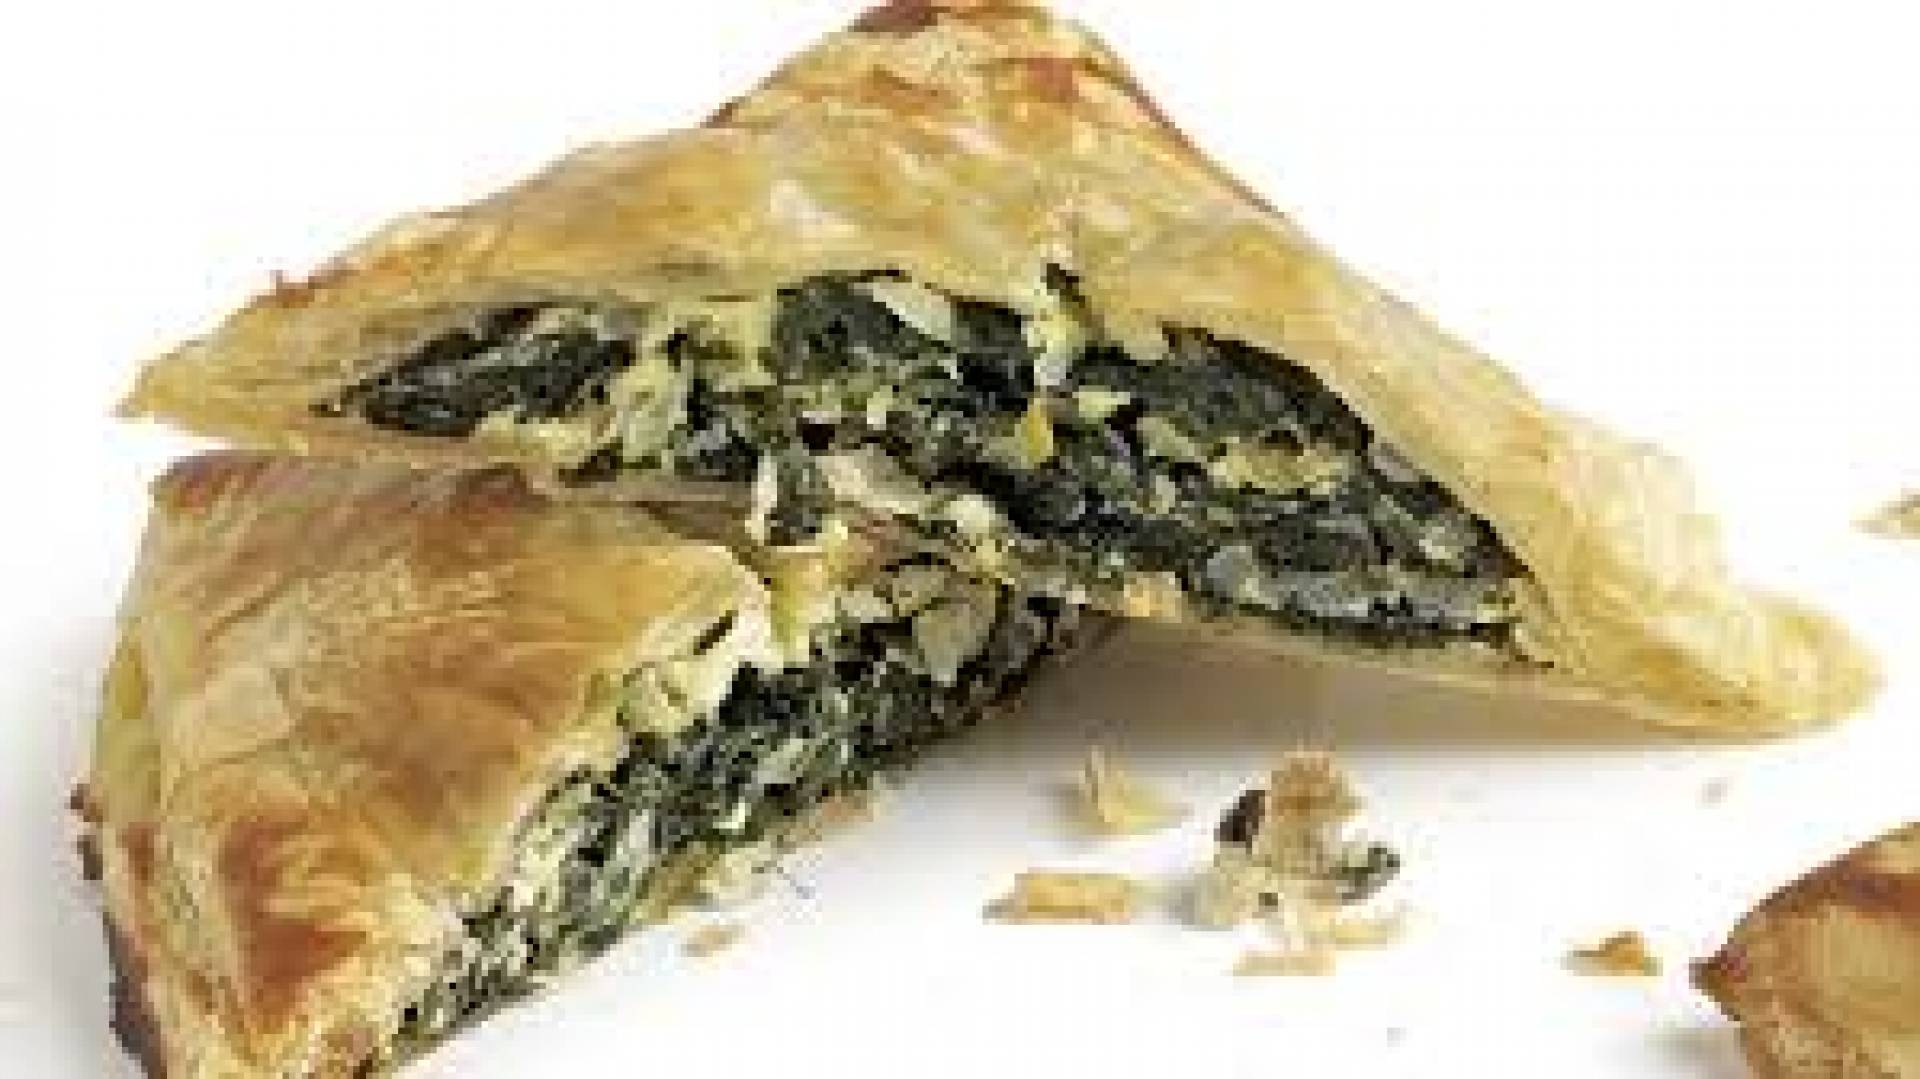 Spanakopita - All Your Meals